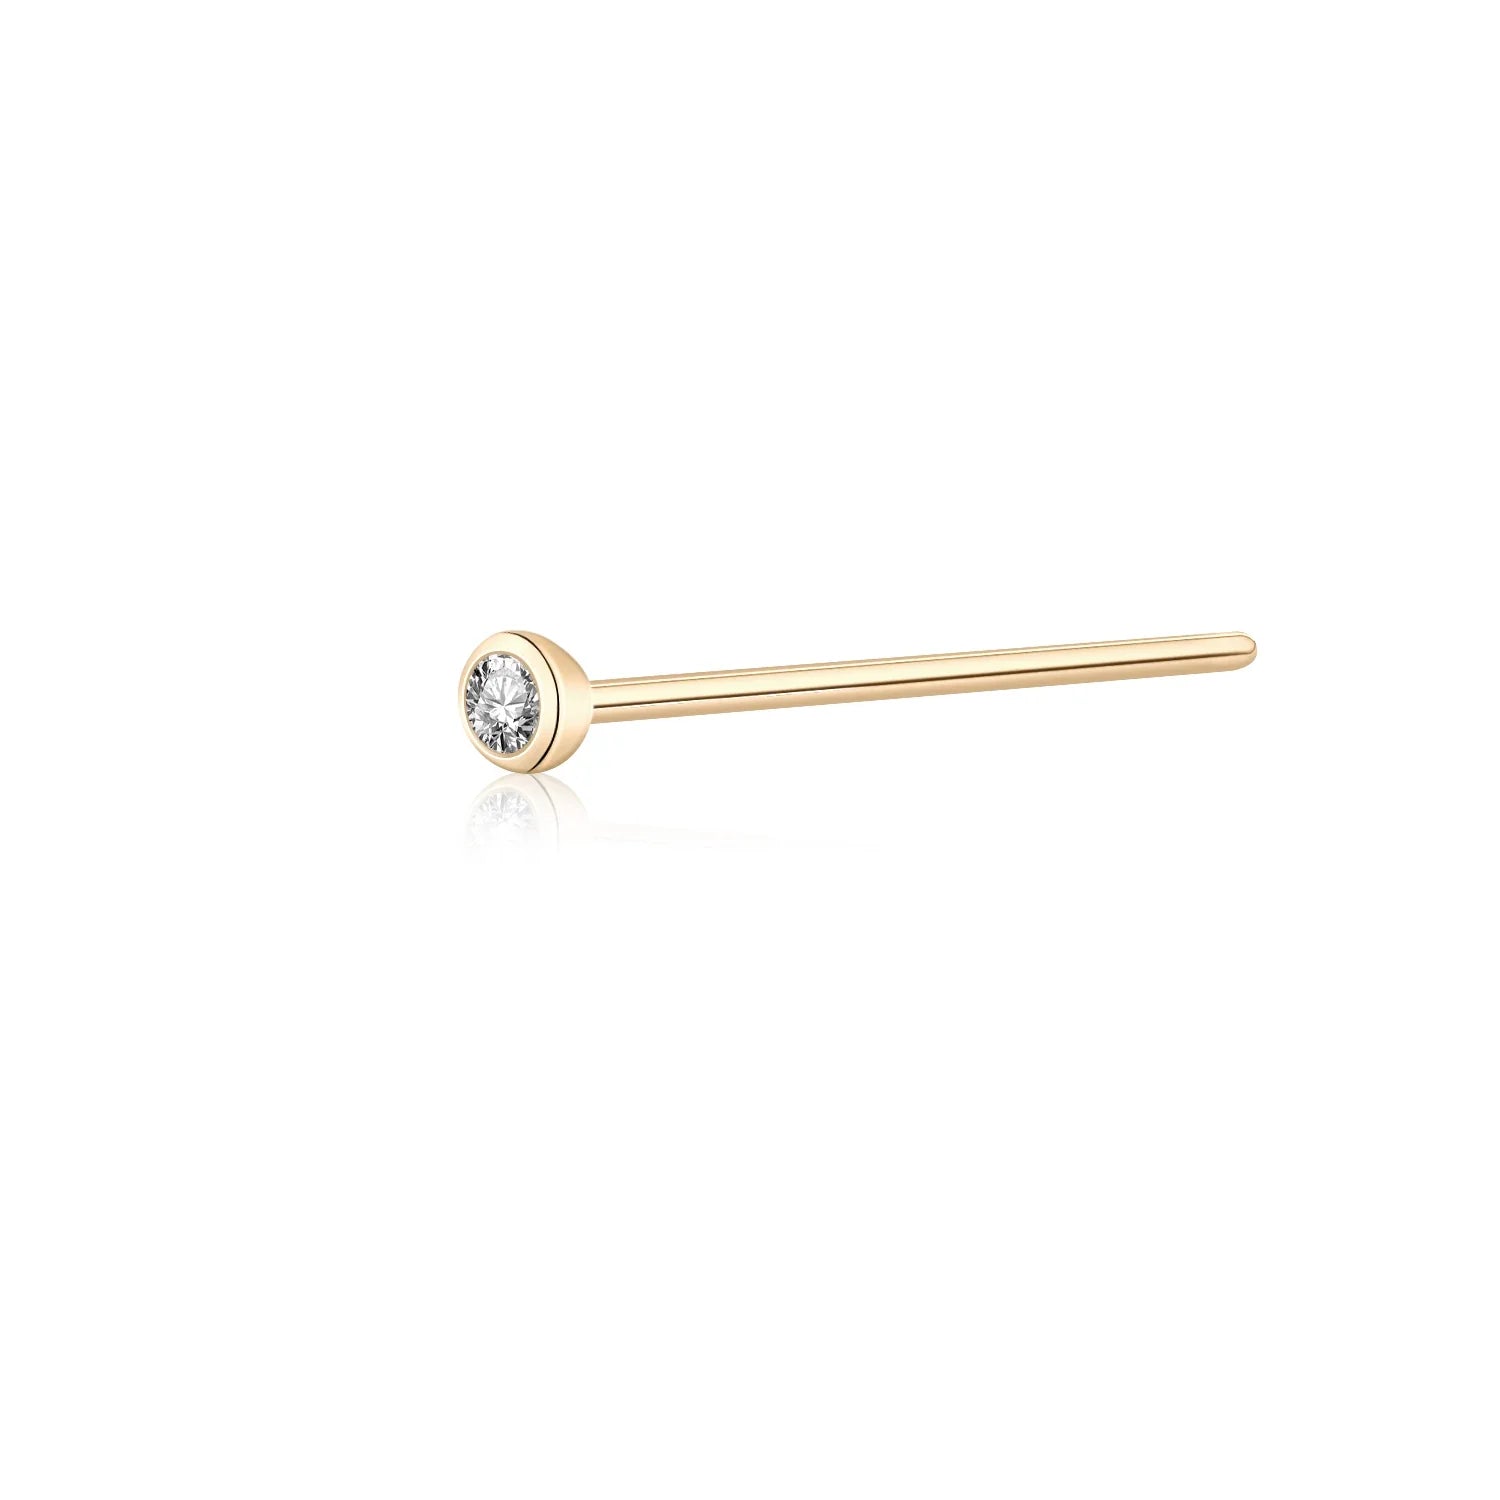 14K gold nose pin with a clear CZ stone fishtail nose stud real gold 20G Ashley Piercing Jewelry